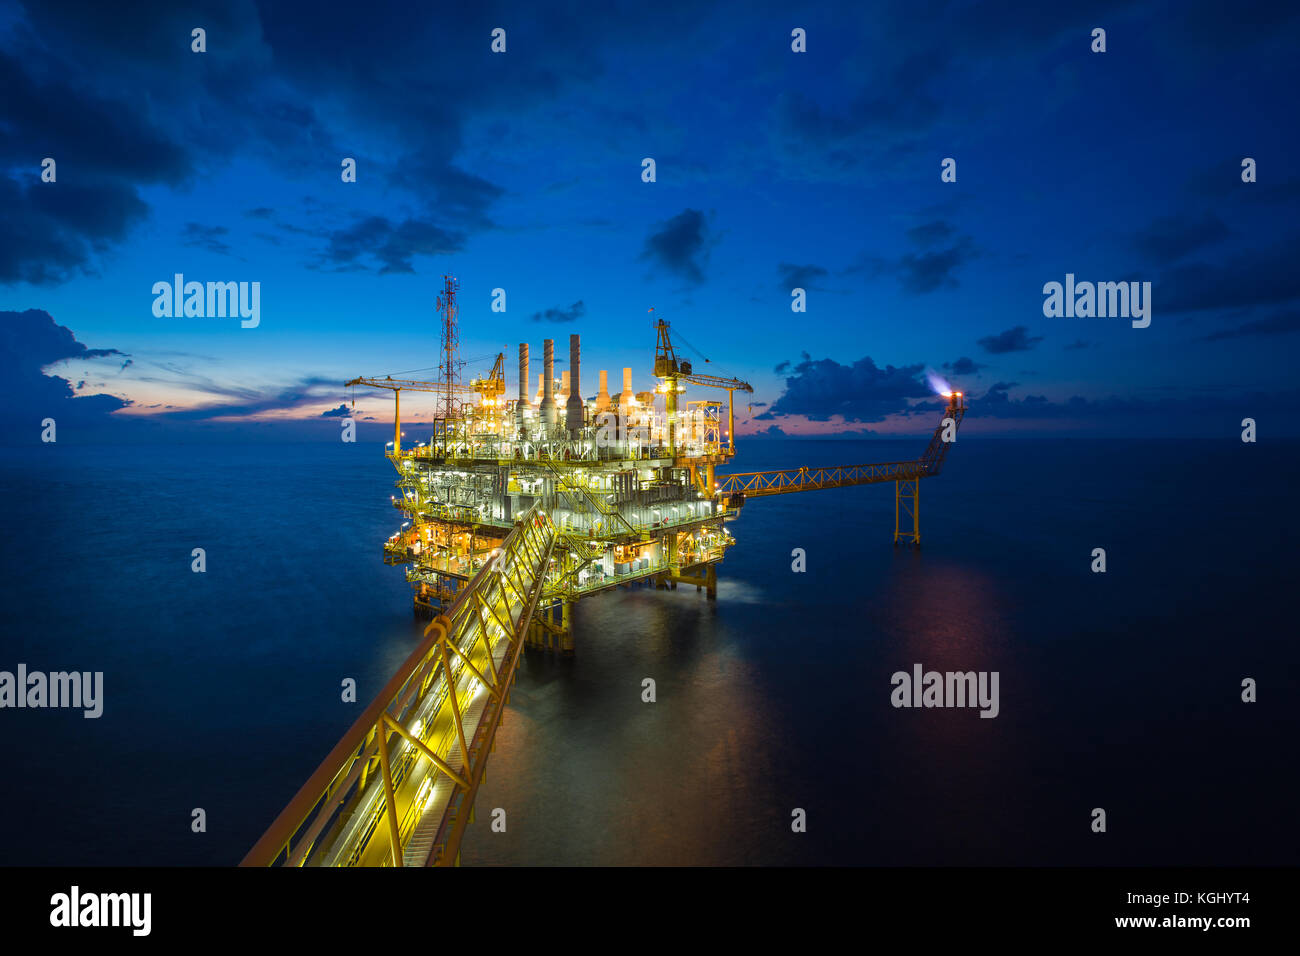 Oil and gas production platform, Oil and Gas  production and exploration business in the gulf of Thailand. Stock Photo